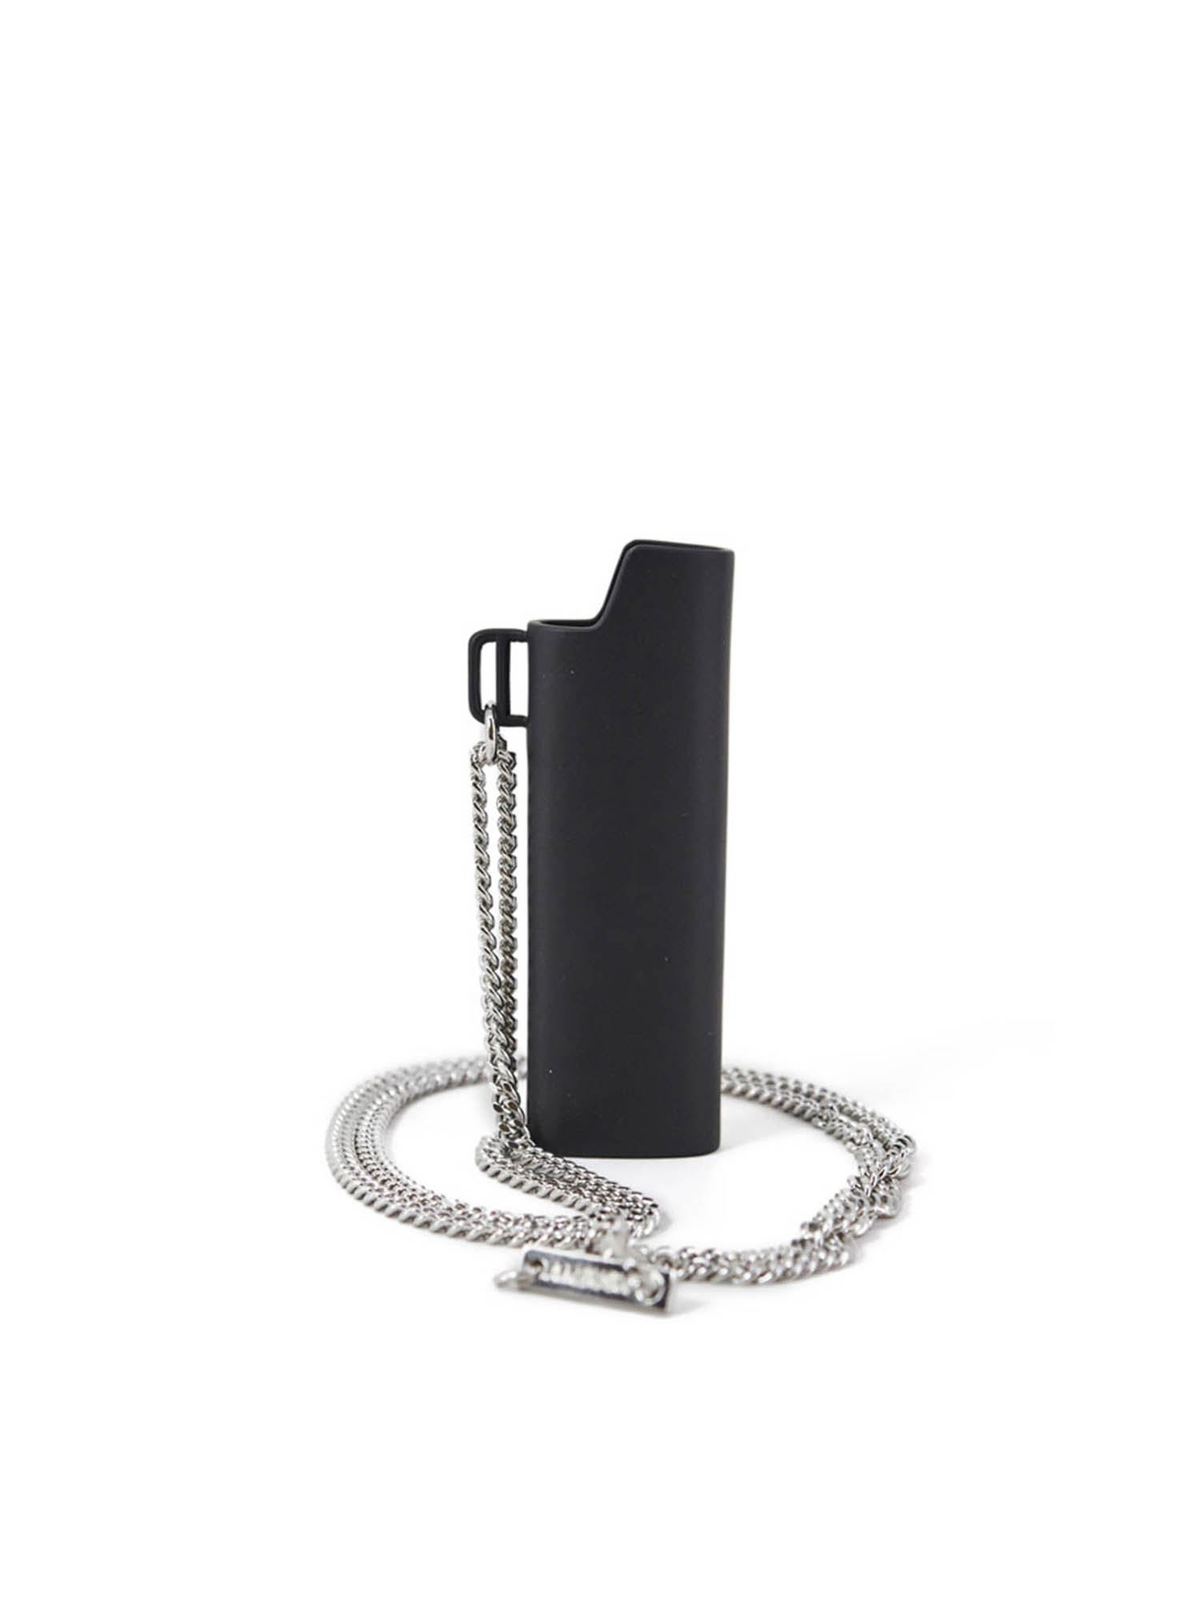 Necklaces & Chokers Ambush - Lighter necklace in black and silver ...